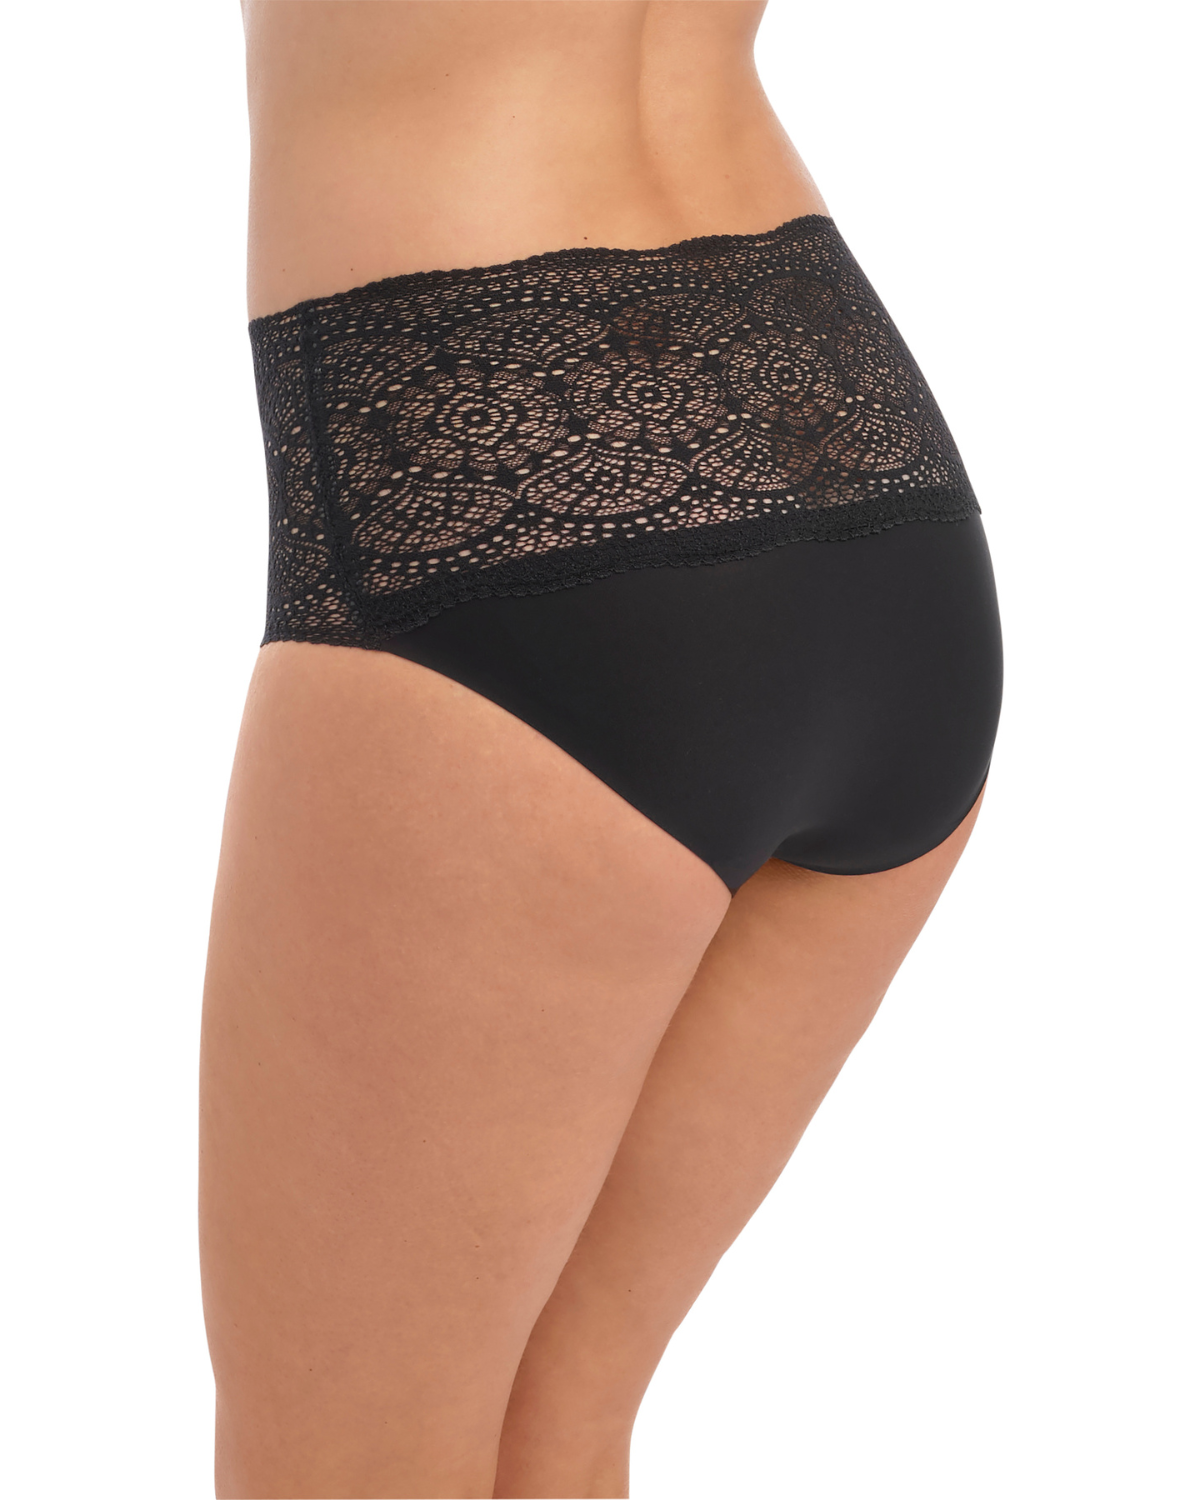 Model wearing a wide lace band brief panty in black